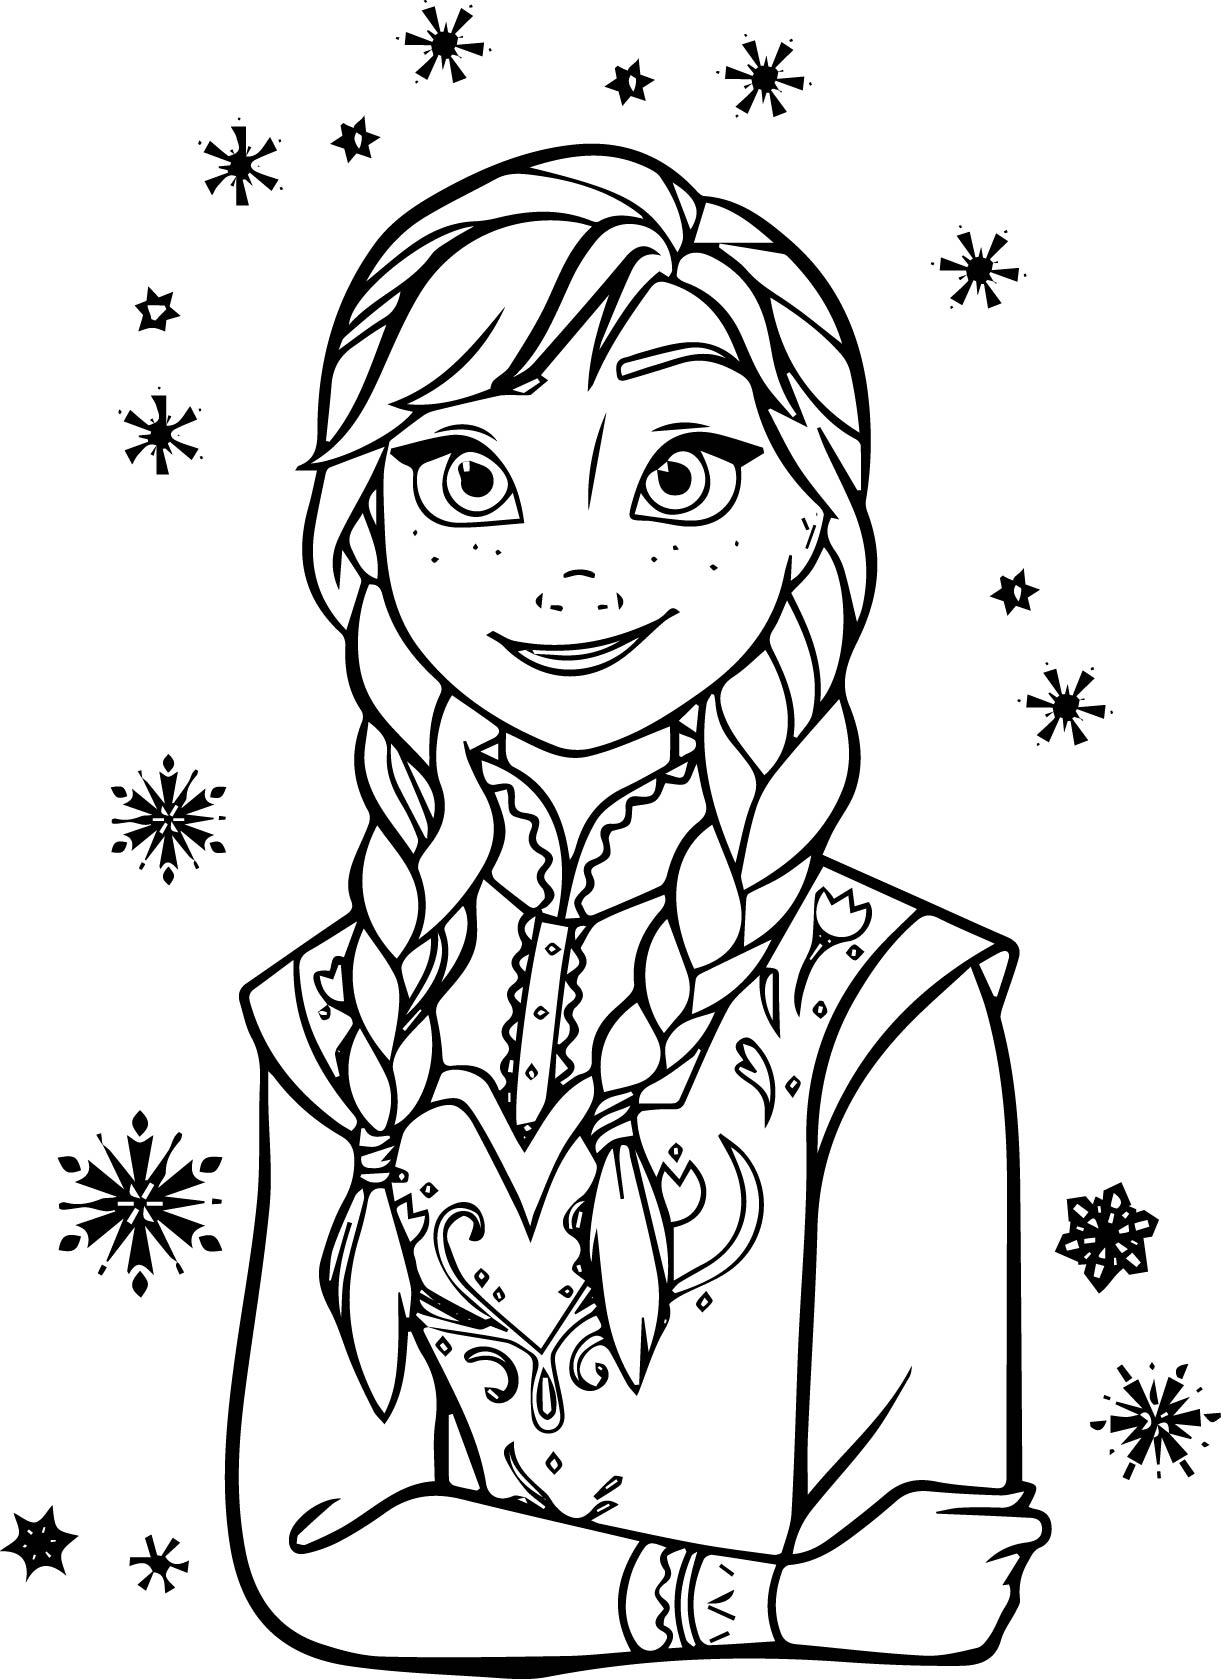 Frozen Coloring Pages Free Printables At GetDrawings Free Download